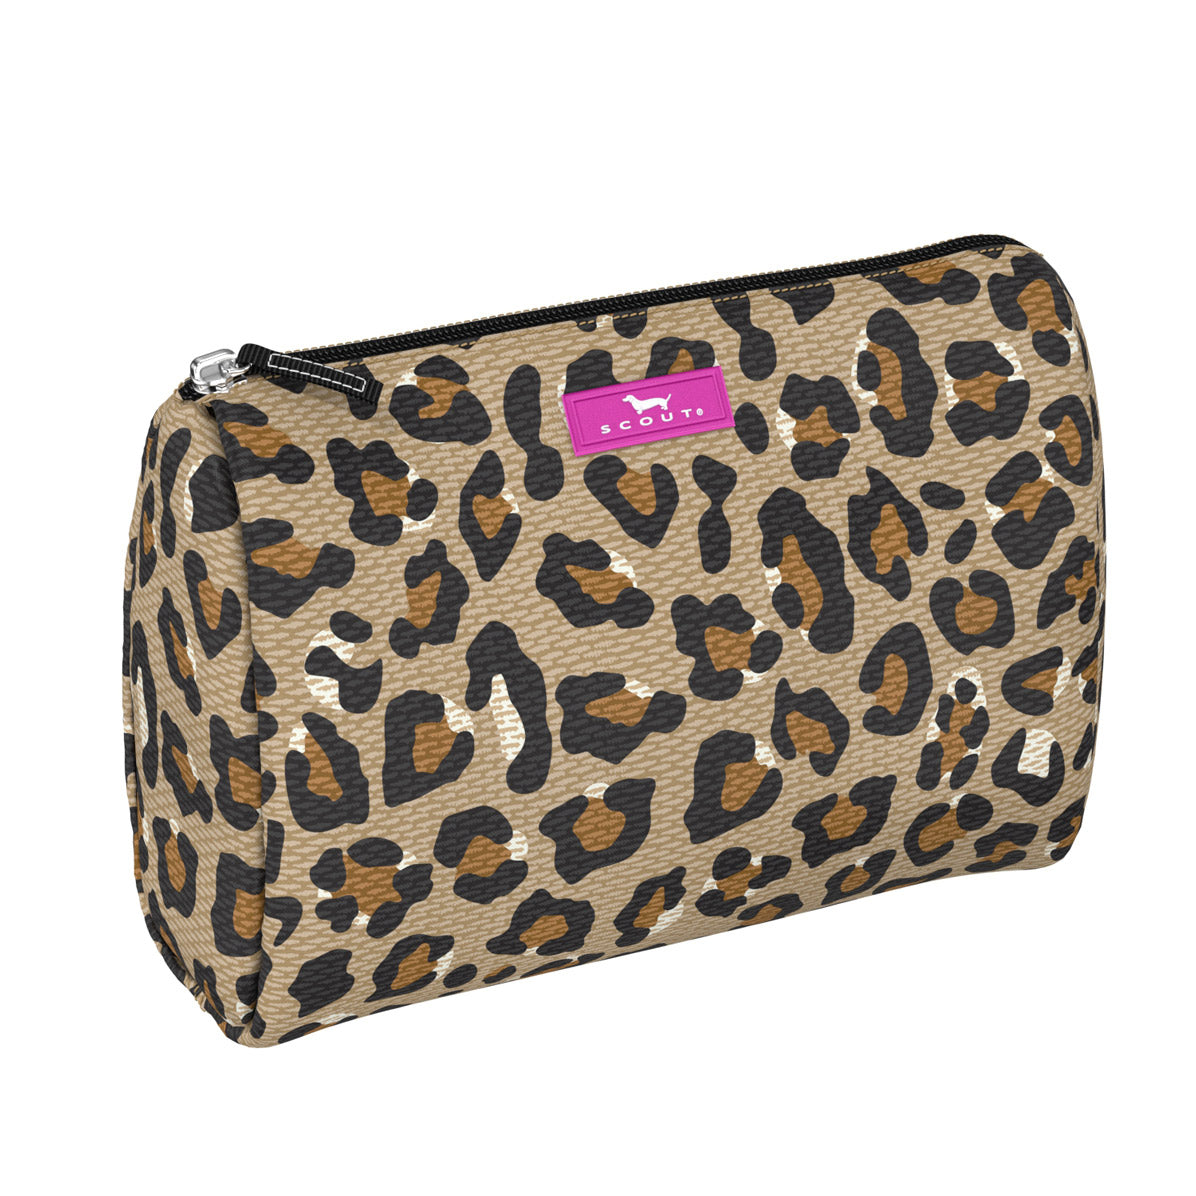 LYDZTION Leopard Print Makeup Bag Cosmetic Bag for Women,Large Capacity  Canvas Makeup Bags Travel Toiletry Bag Accessories Organizer,Black